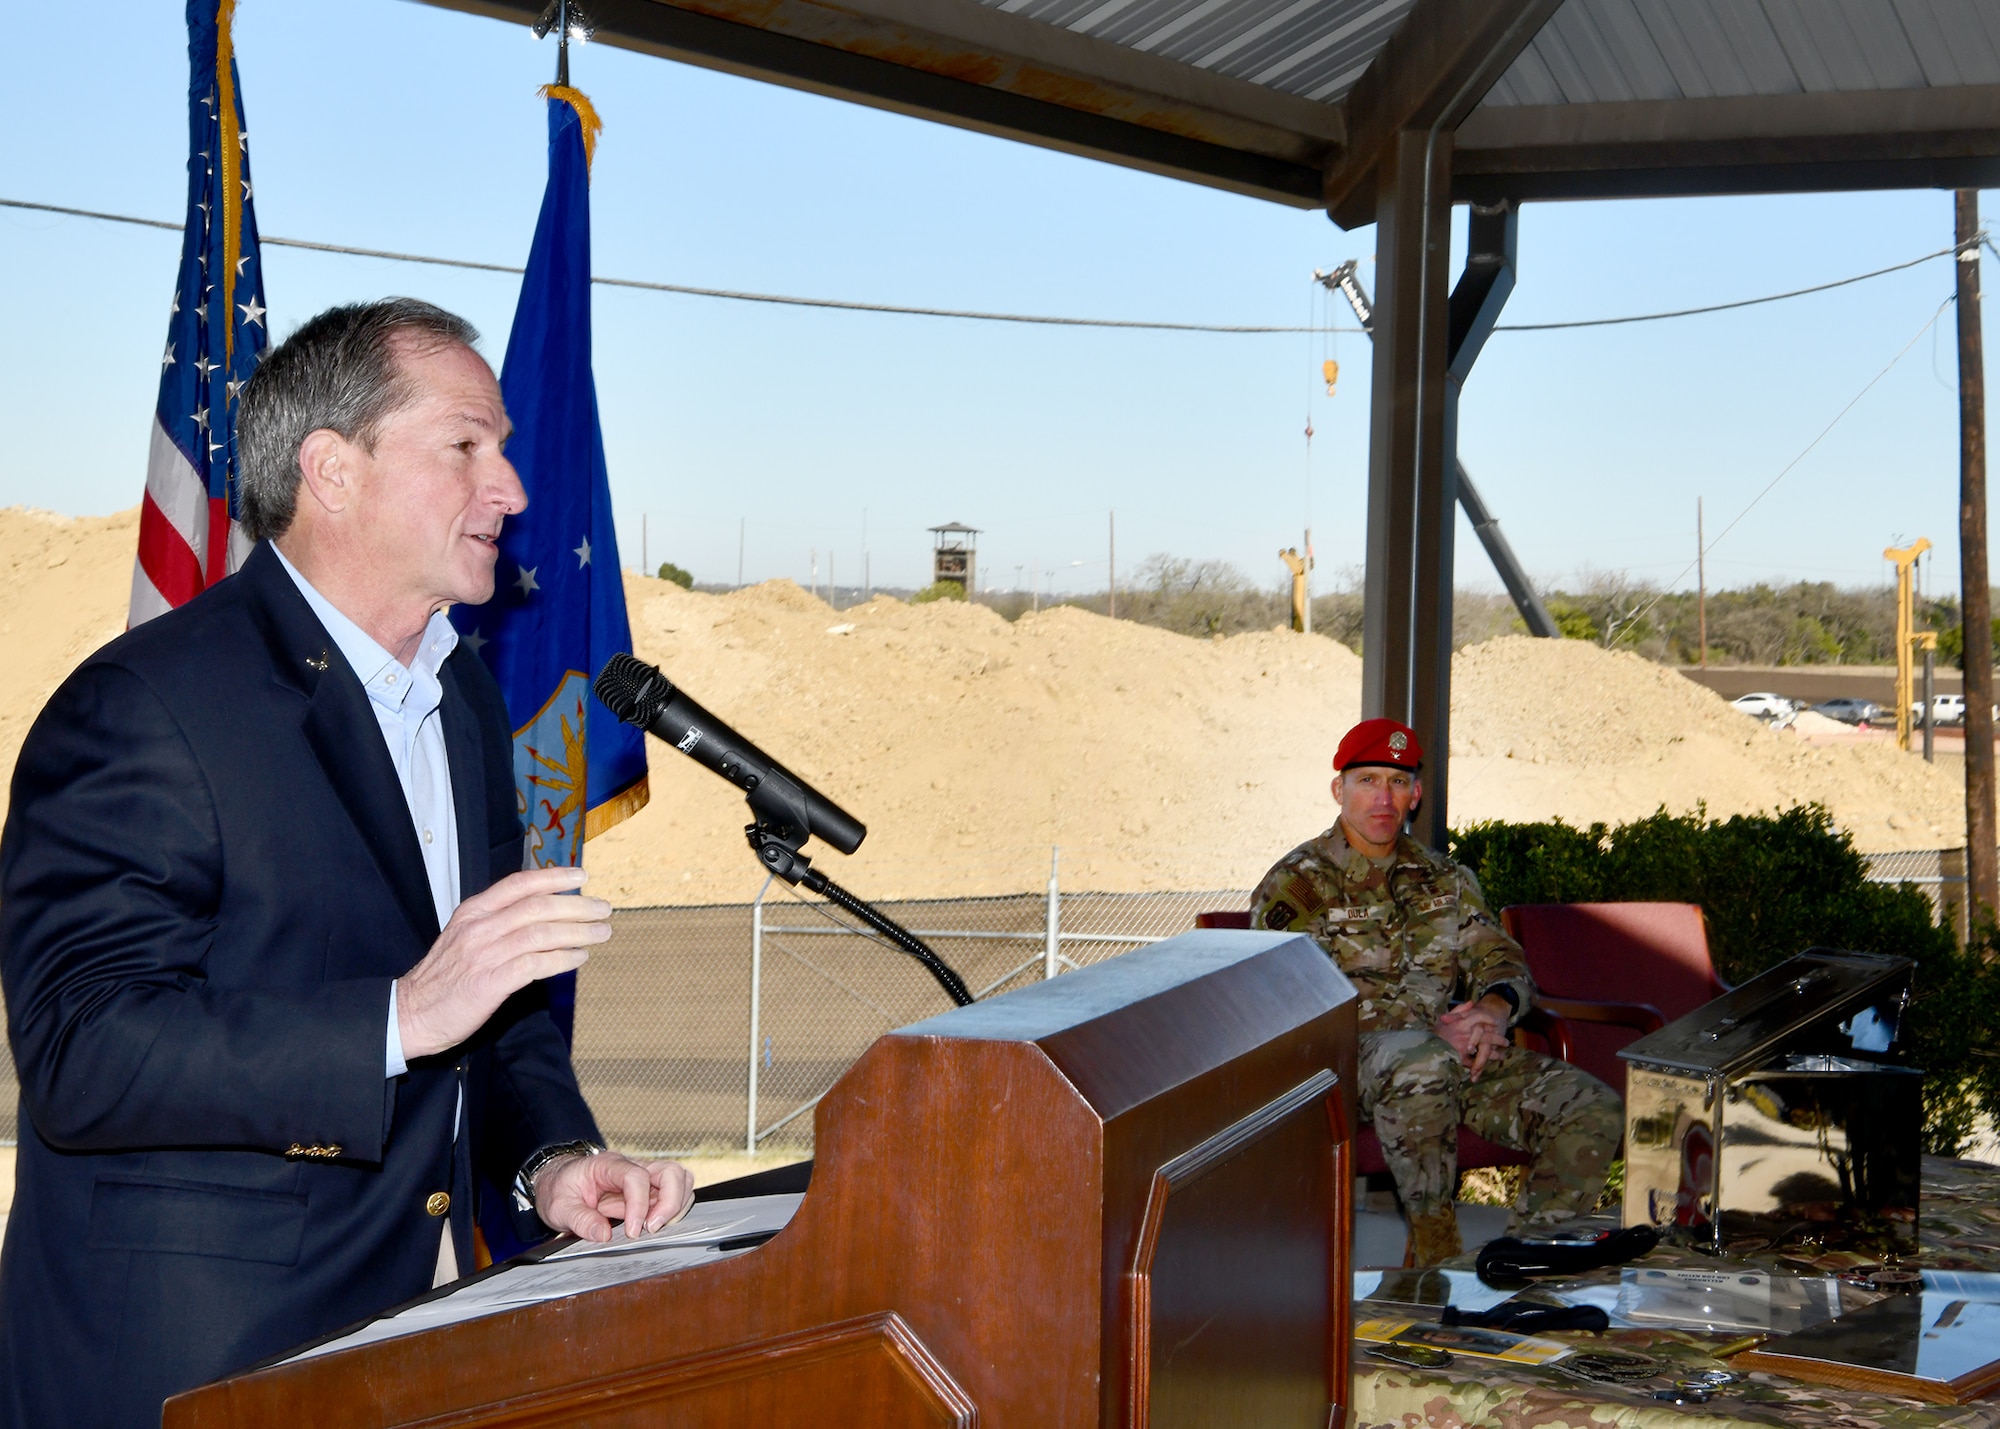 Former U.S. Air Force Chief of Staff Gen. David Goldfein (ret.) speaks at the Special Warfare Training Wing prior to placing an item in the SWTW aquatics training center heritage capsule while standing in front of the future site of the SWTW aquatics training facility while U.S. Air Force Col. Mason R. Dula, SWTWE, commander listens